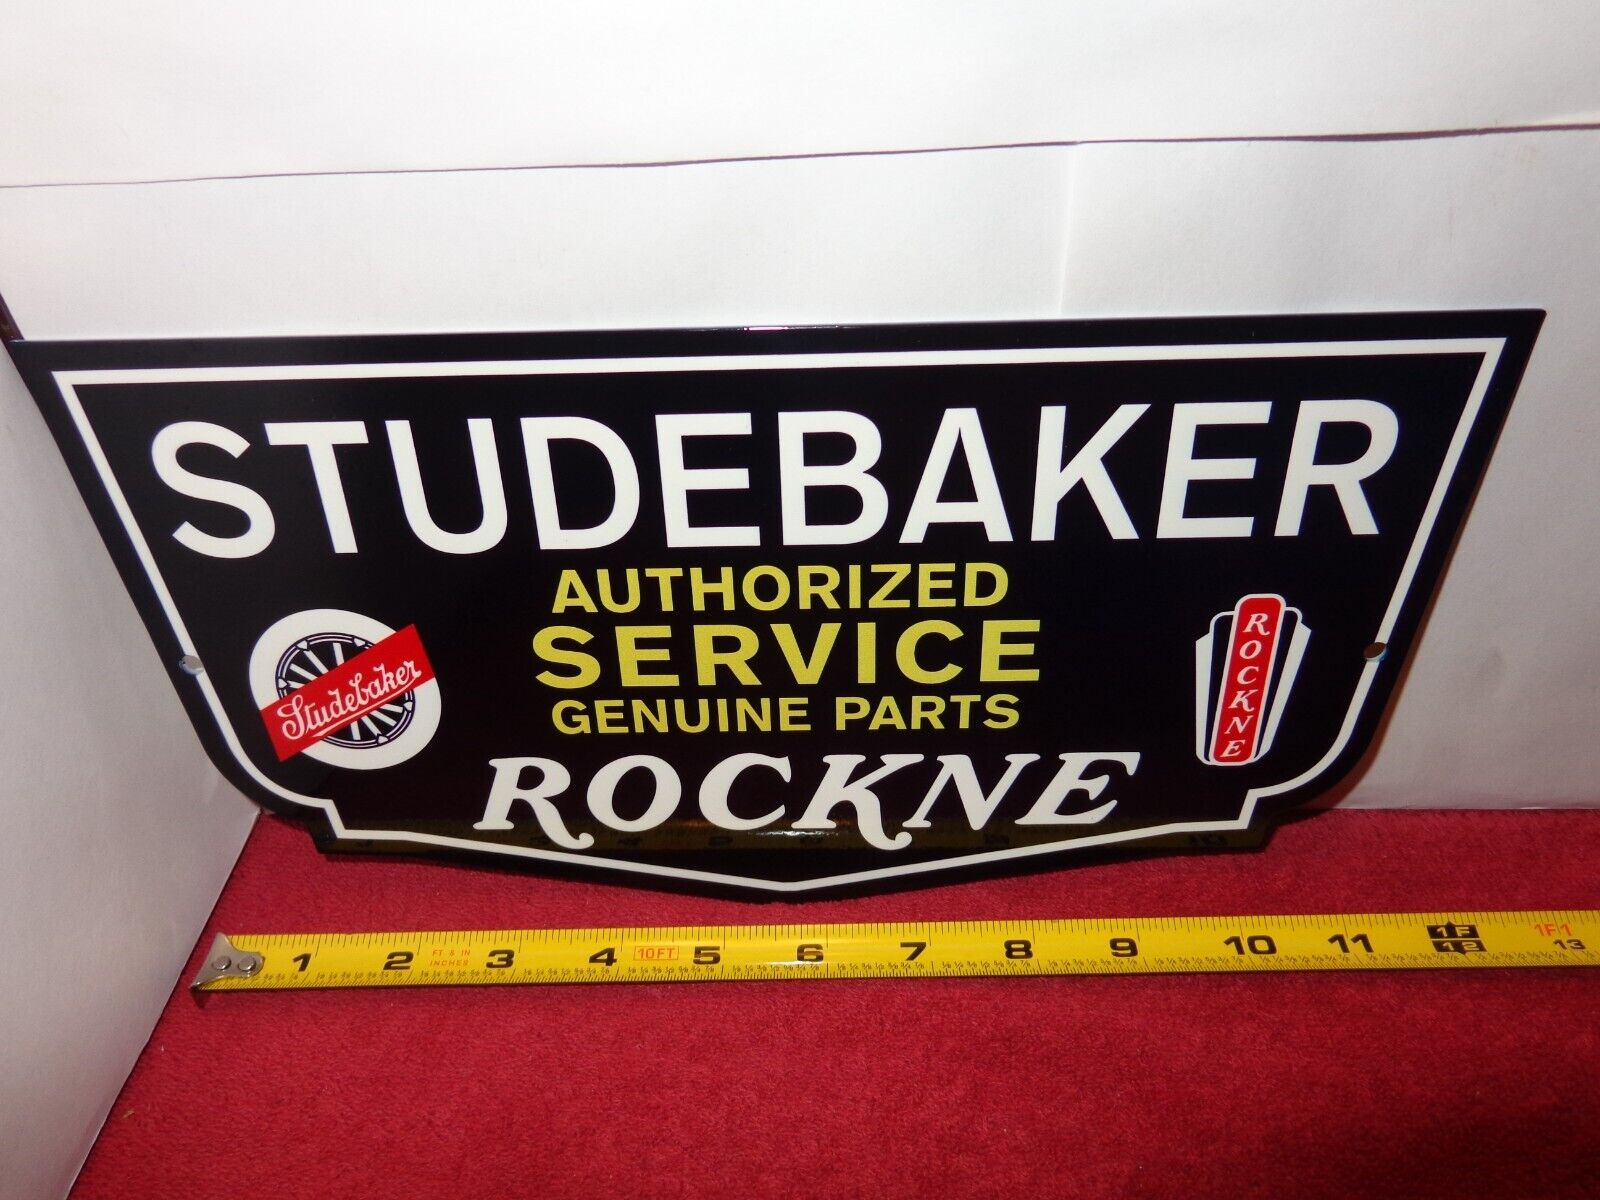 12x6 in STUDEBAKER AUTOMOBILE SALES SERVICES PARTS ADV. SIGN DIE CUT METAL #Z264